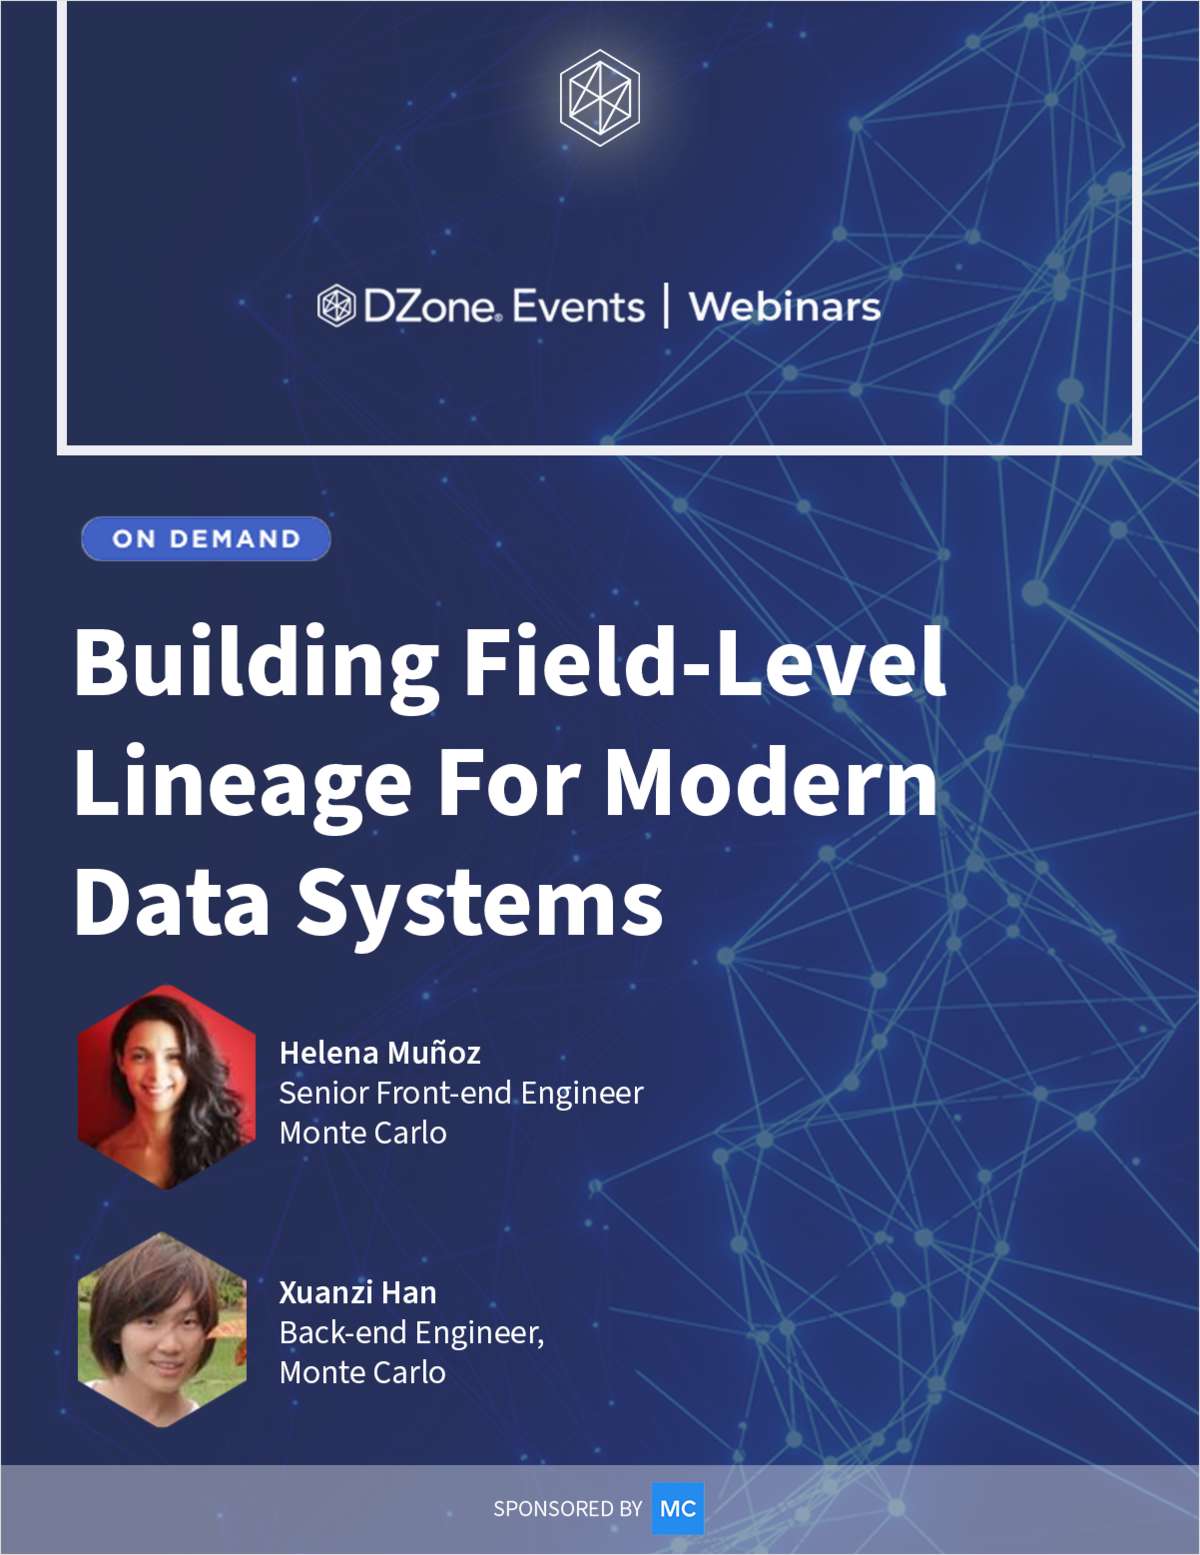 Building Field-Level Lineage For Modern Data Systems